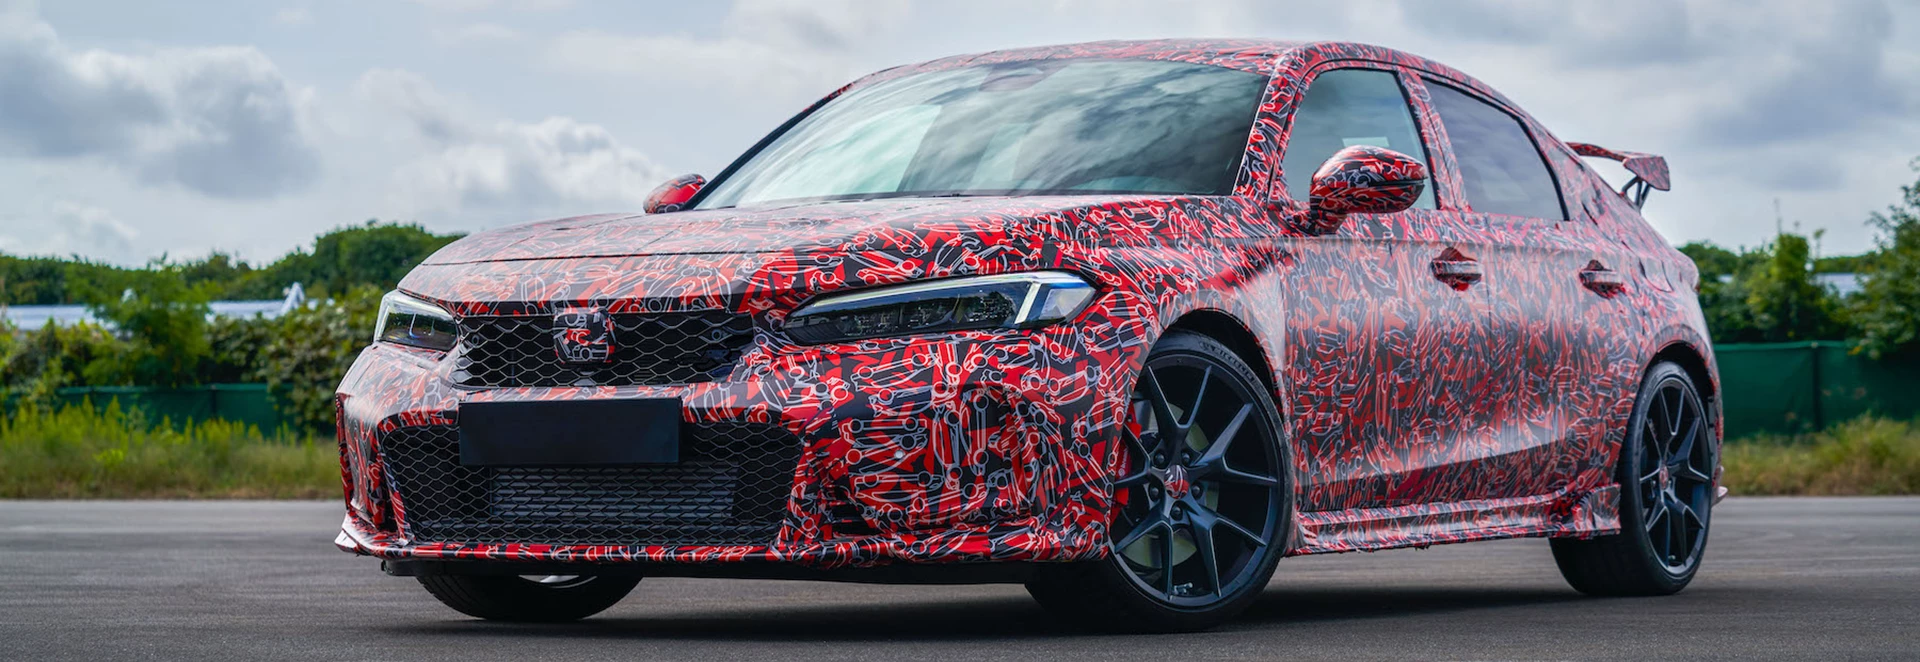 Honda officially teases new Civic Type R hot hatch 